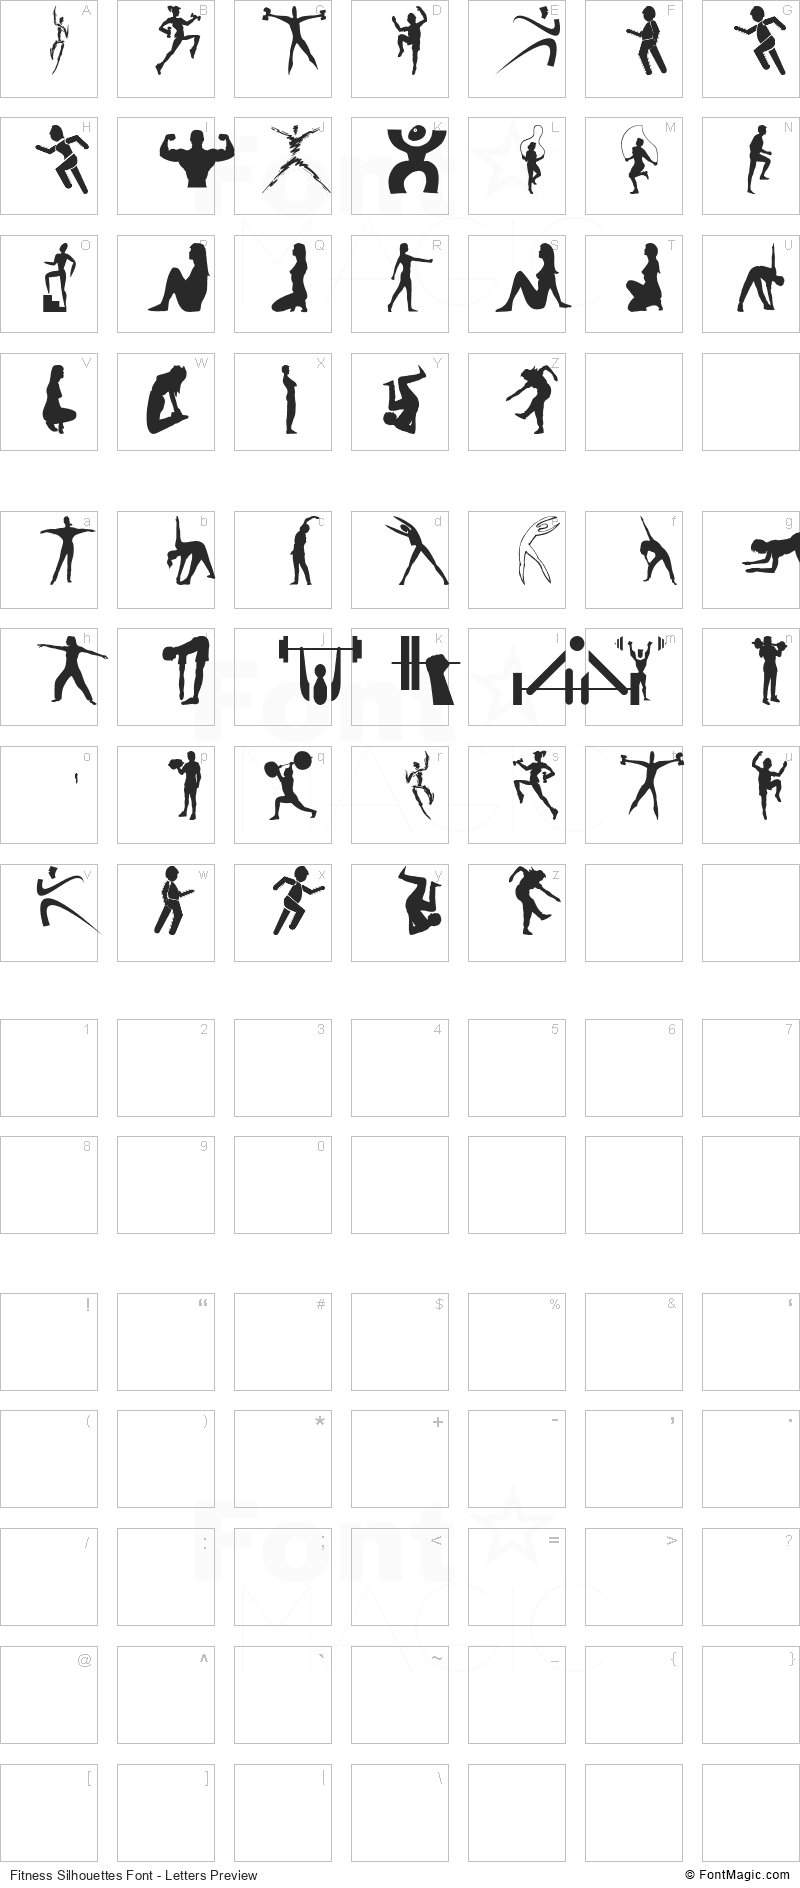 Fitness Silhouettes Font - All Latters Preview Chart